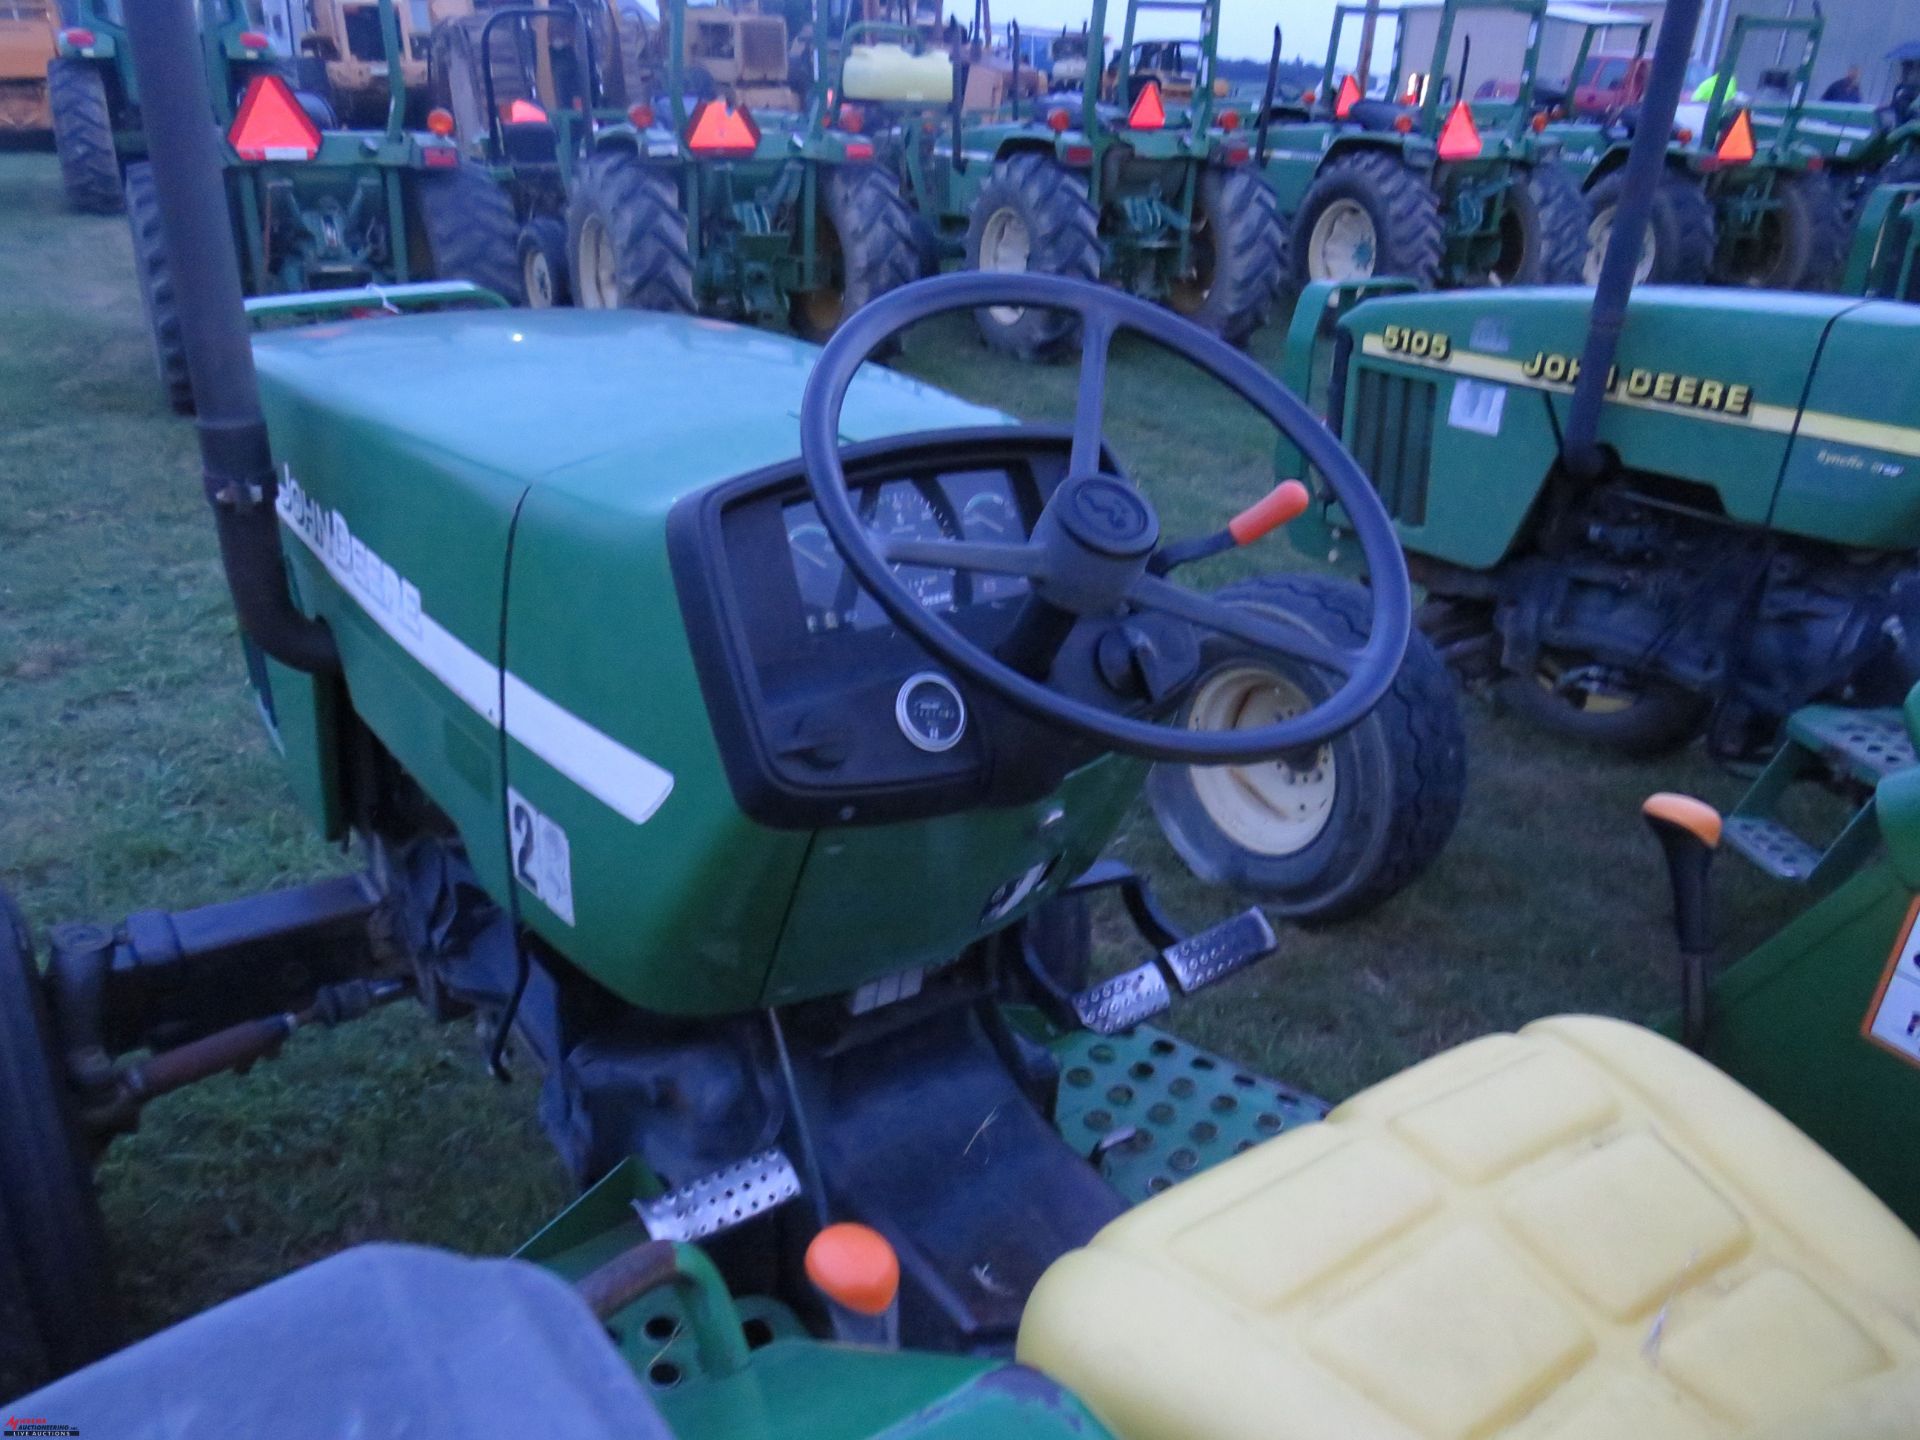 2007 JOHN DEERE 5103 TRACTOR, 3PT, NO TOP LINK, HAS PTO, 13.6-28 REAR TIRES, HOURS NOT AVAILABLE - Image 7 of 8